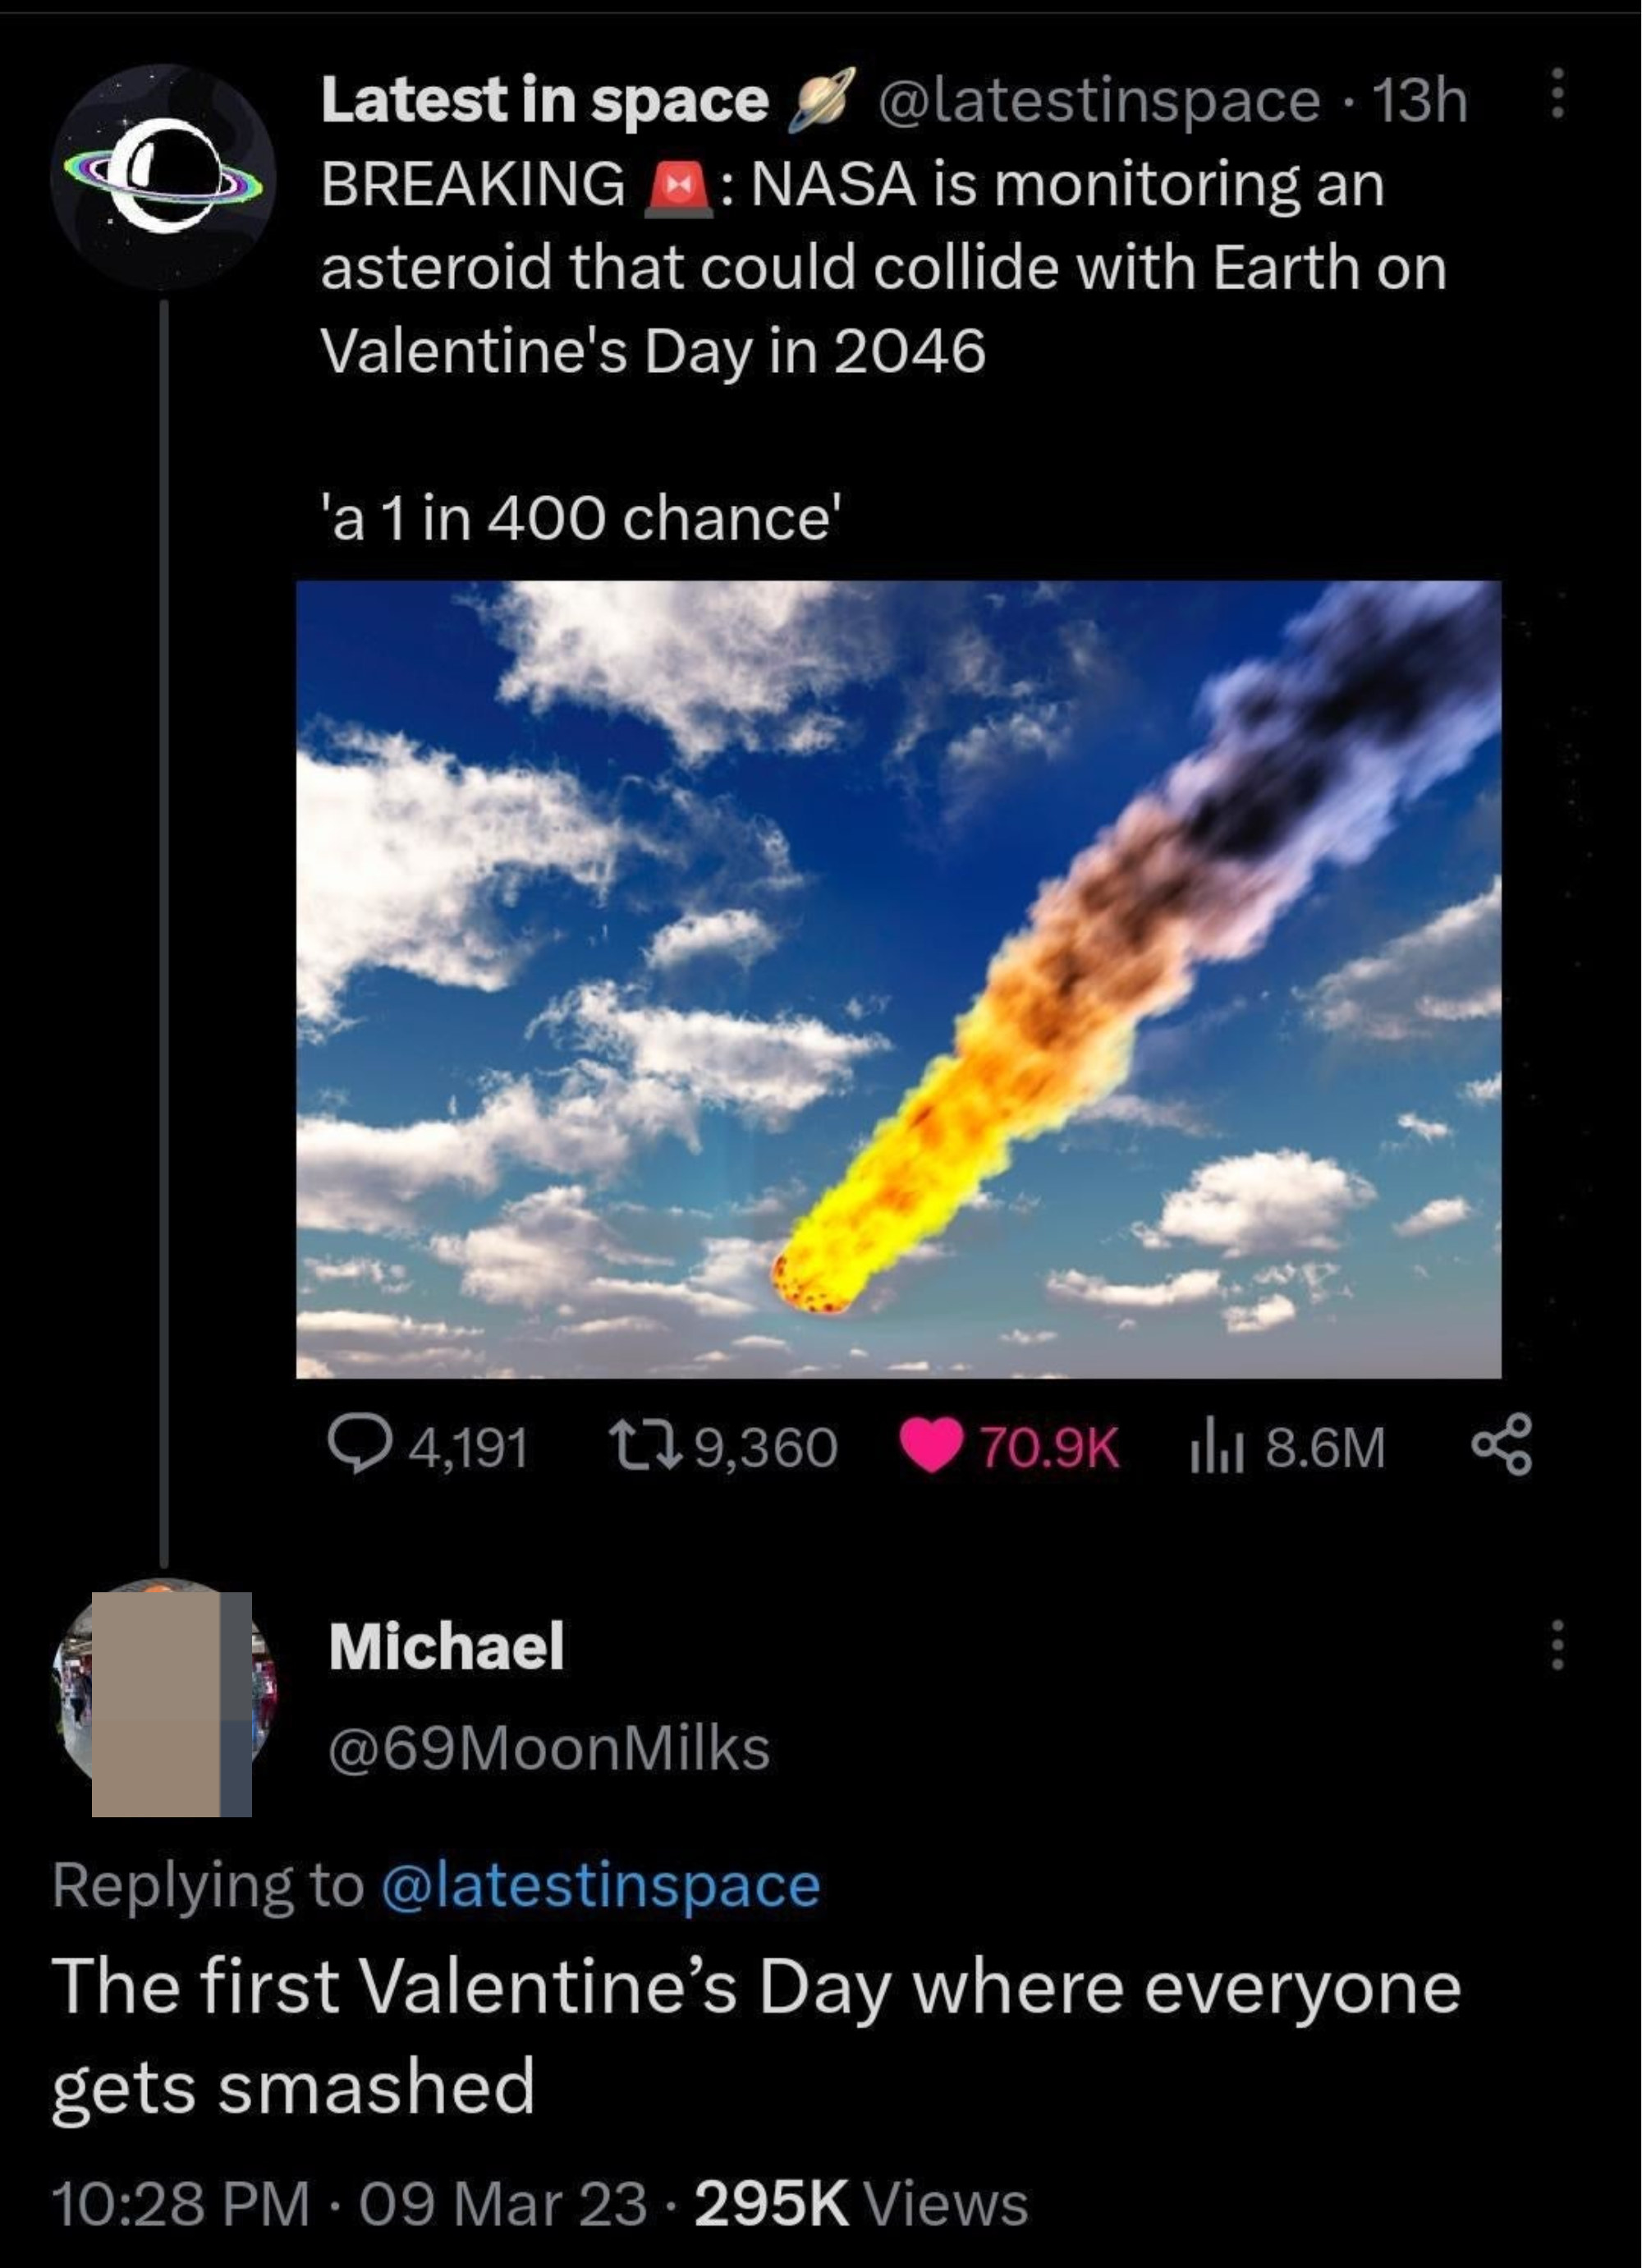 Post about a meteor due to hit the Earth on Valentine&#x27;s Day, and someone says this is the first V-day where everyone is going to get smashed